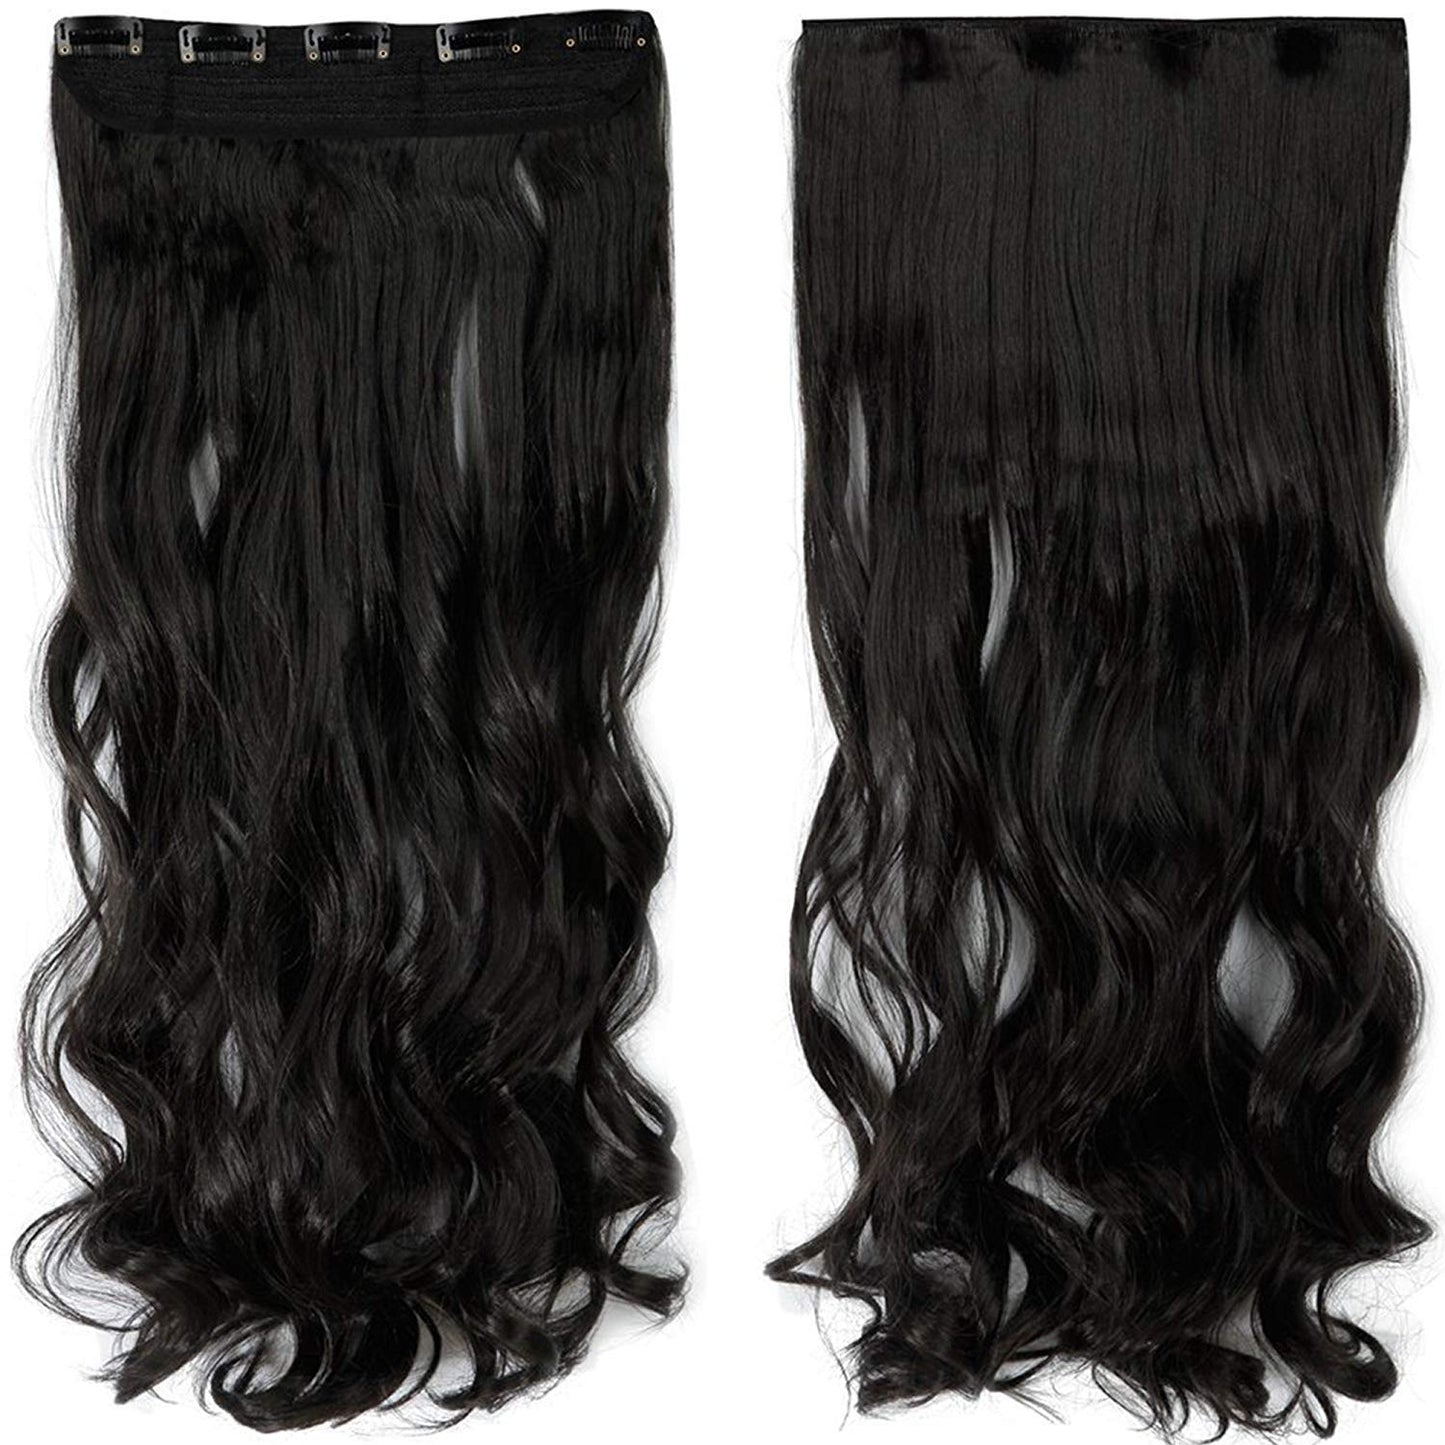 Hair Extension 5 Clips (24 inch) Straight/Curly